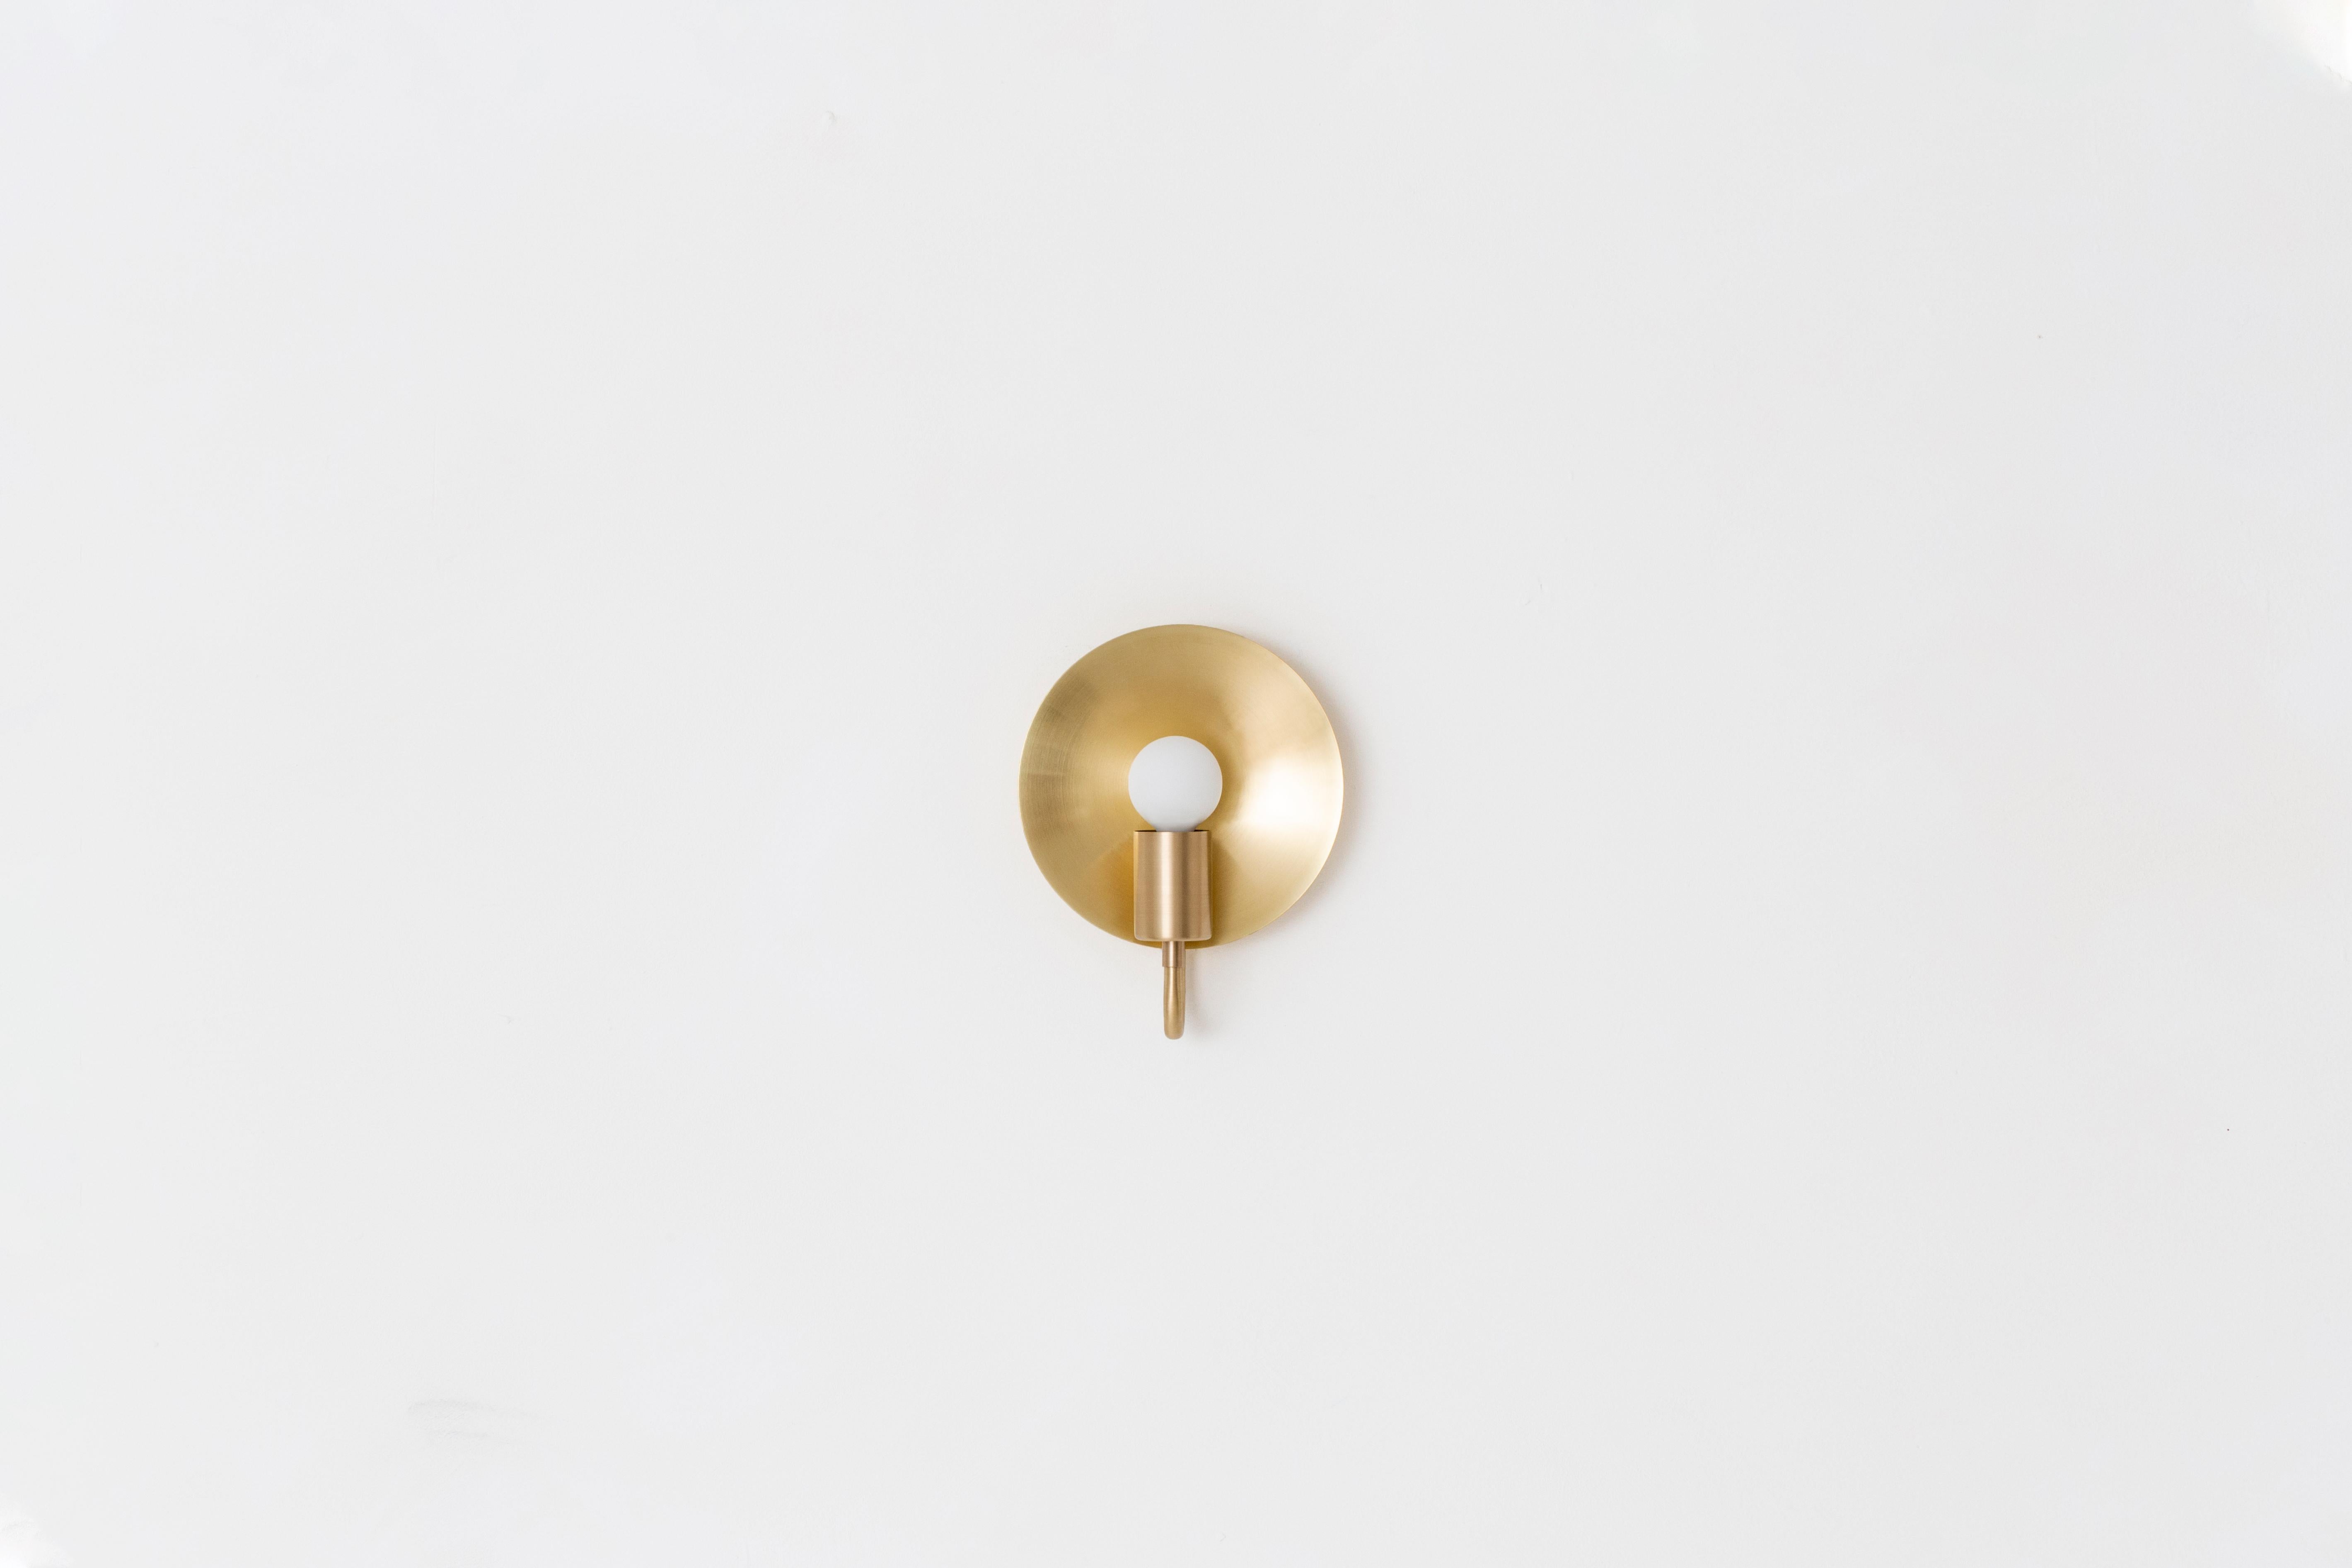 A fixed version of our classic Orbit Sconce, this ADA compliant fixture is perfectly proportioned for any space where a minimal profile is desired. A modern take on an early American candle form, the piece features a radiant disc that amplifies the